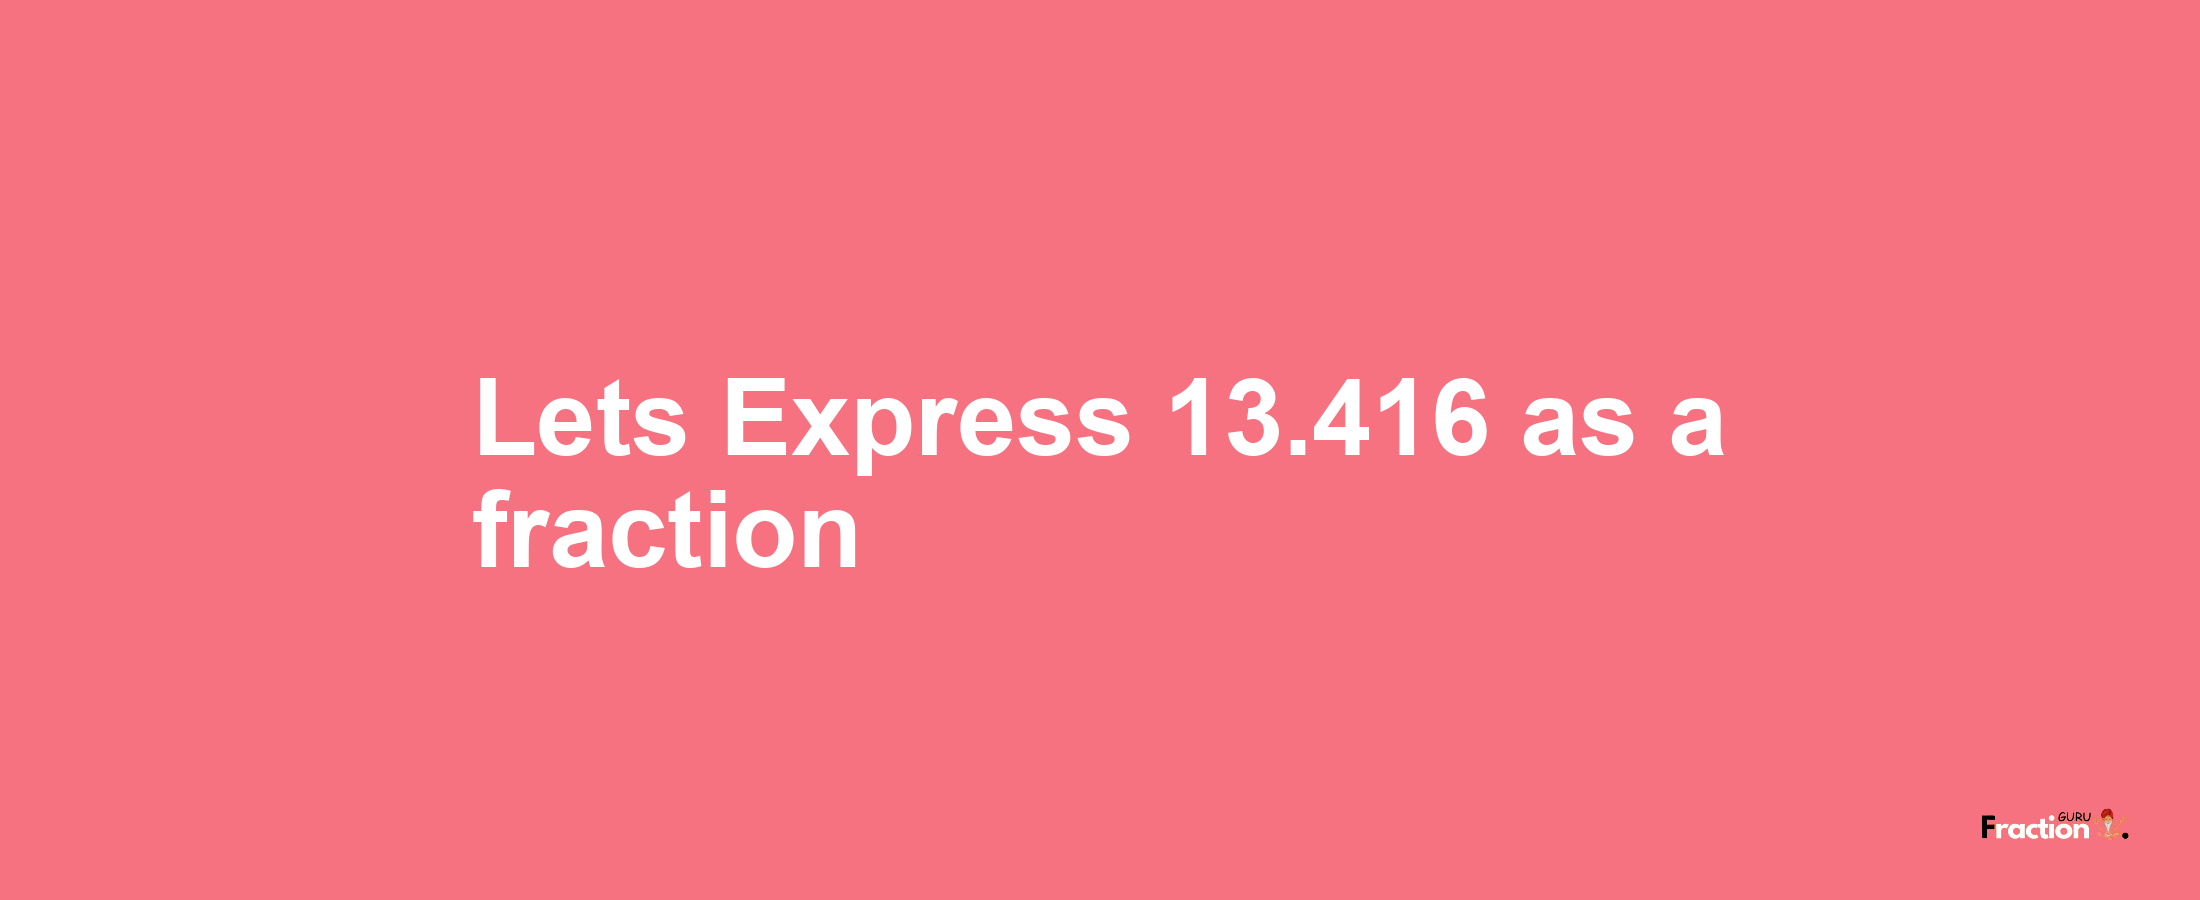 Lets Express 13.416 as afraction